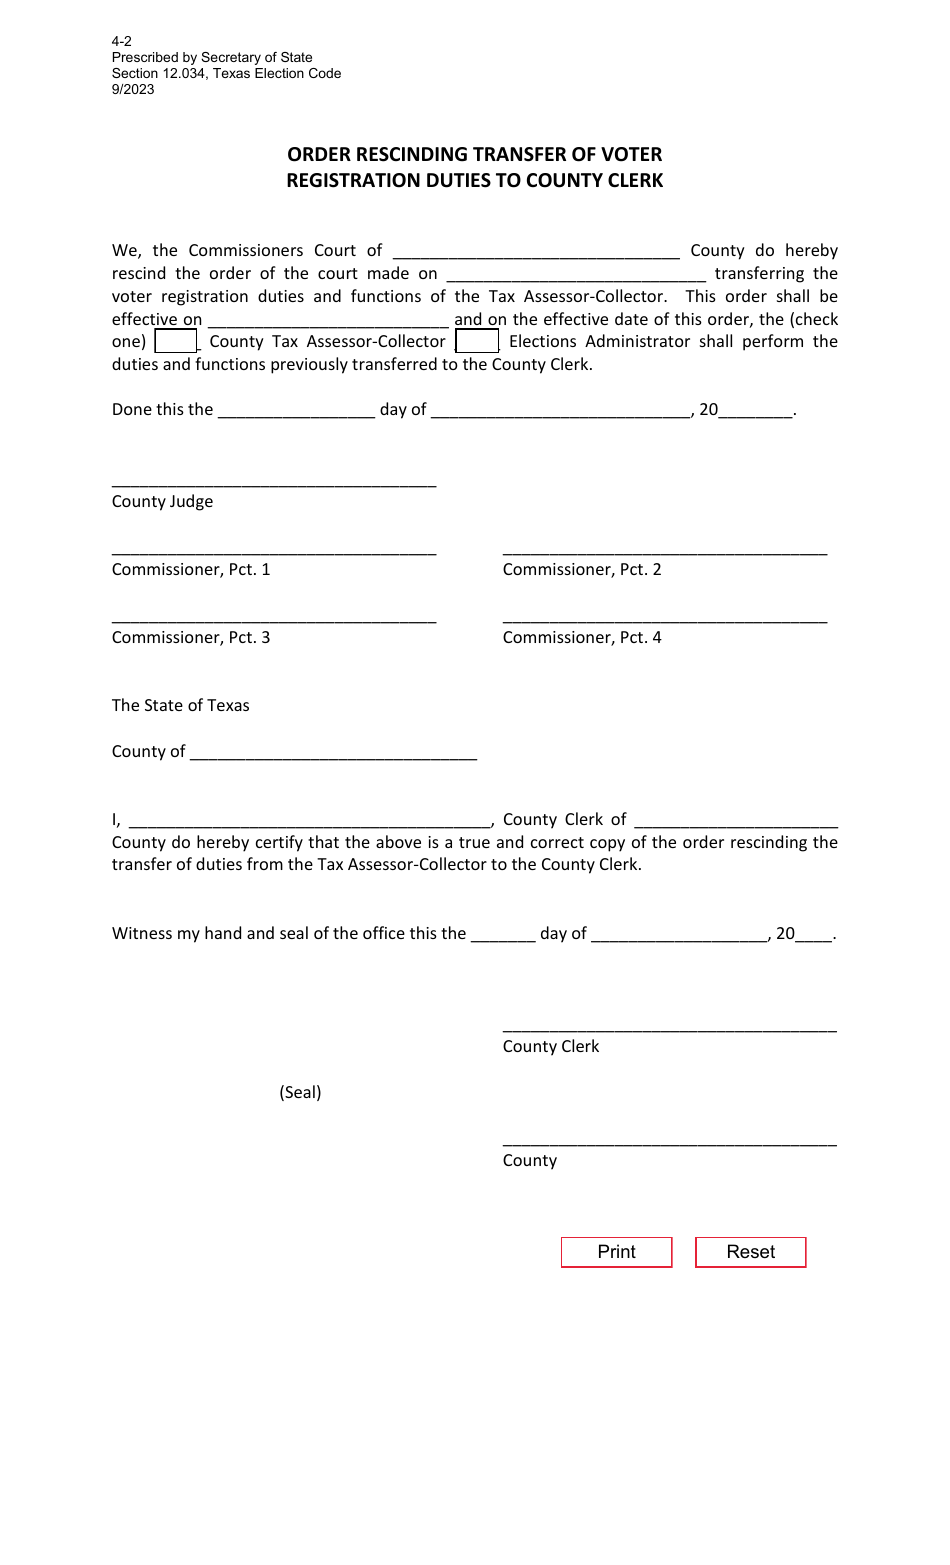 Form 4-2 Order Rescinding Transfer of Voter Registration Duties to County Clerk - Texas, Page 1